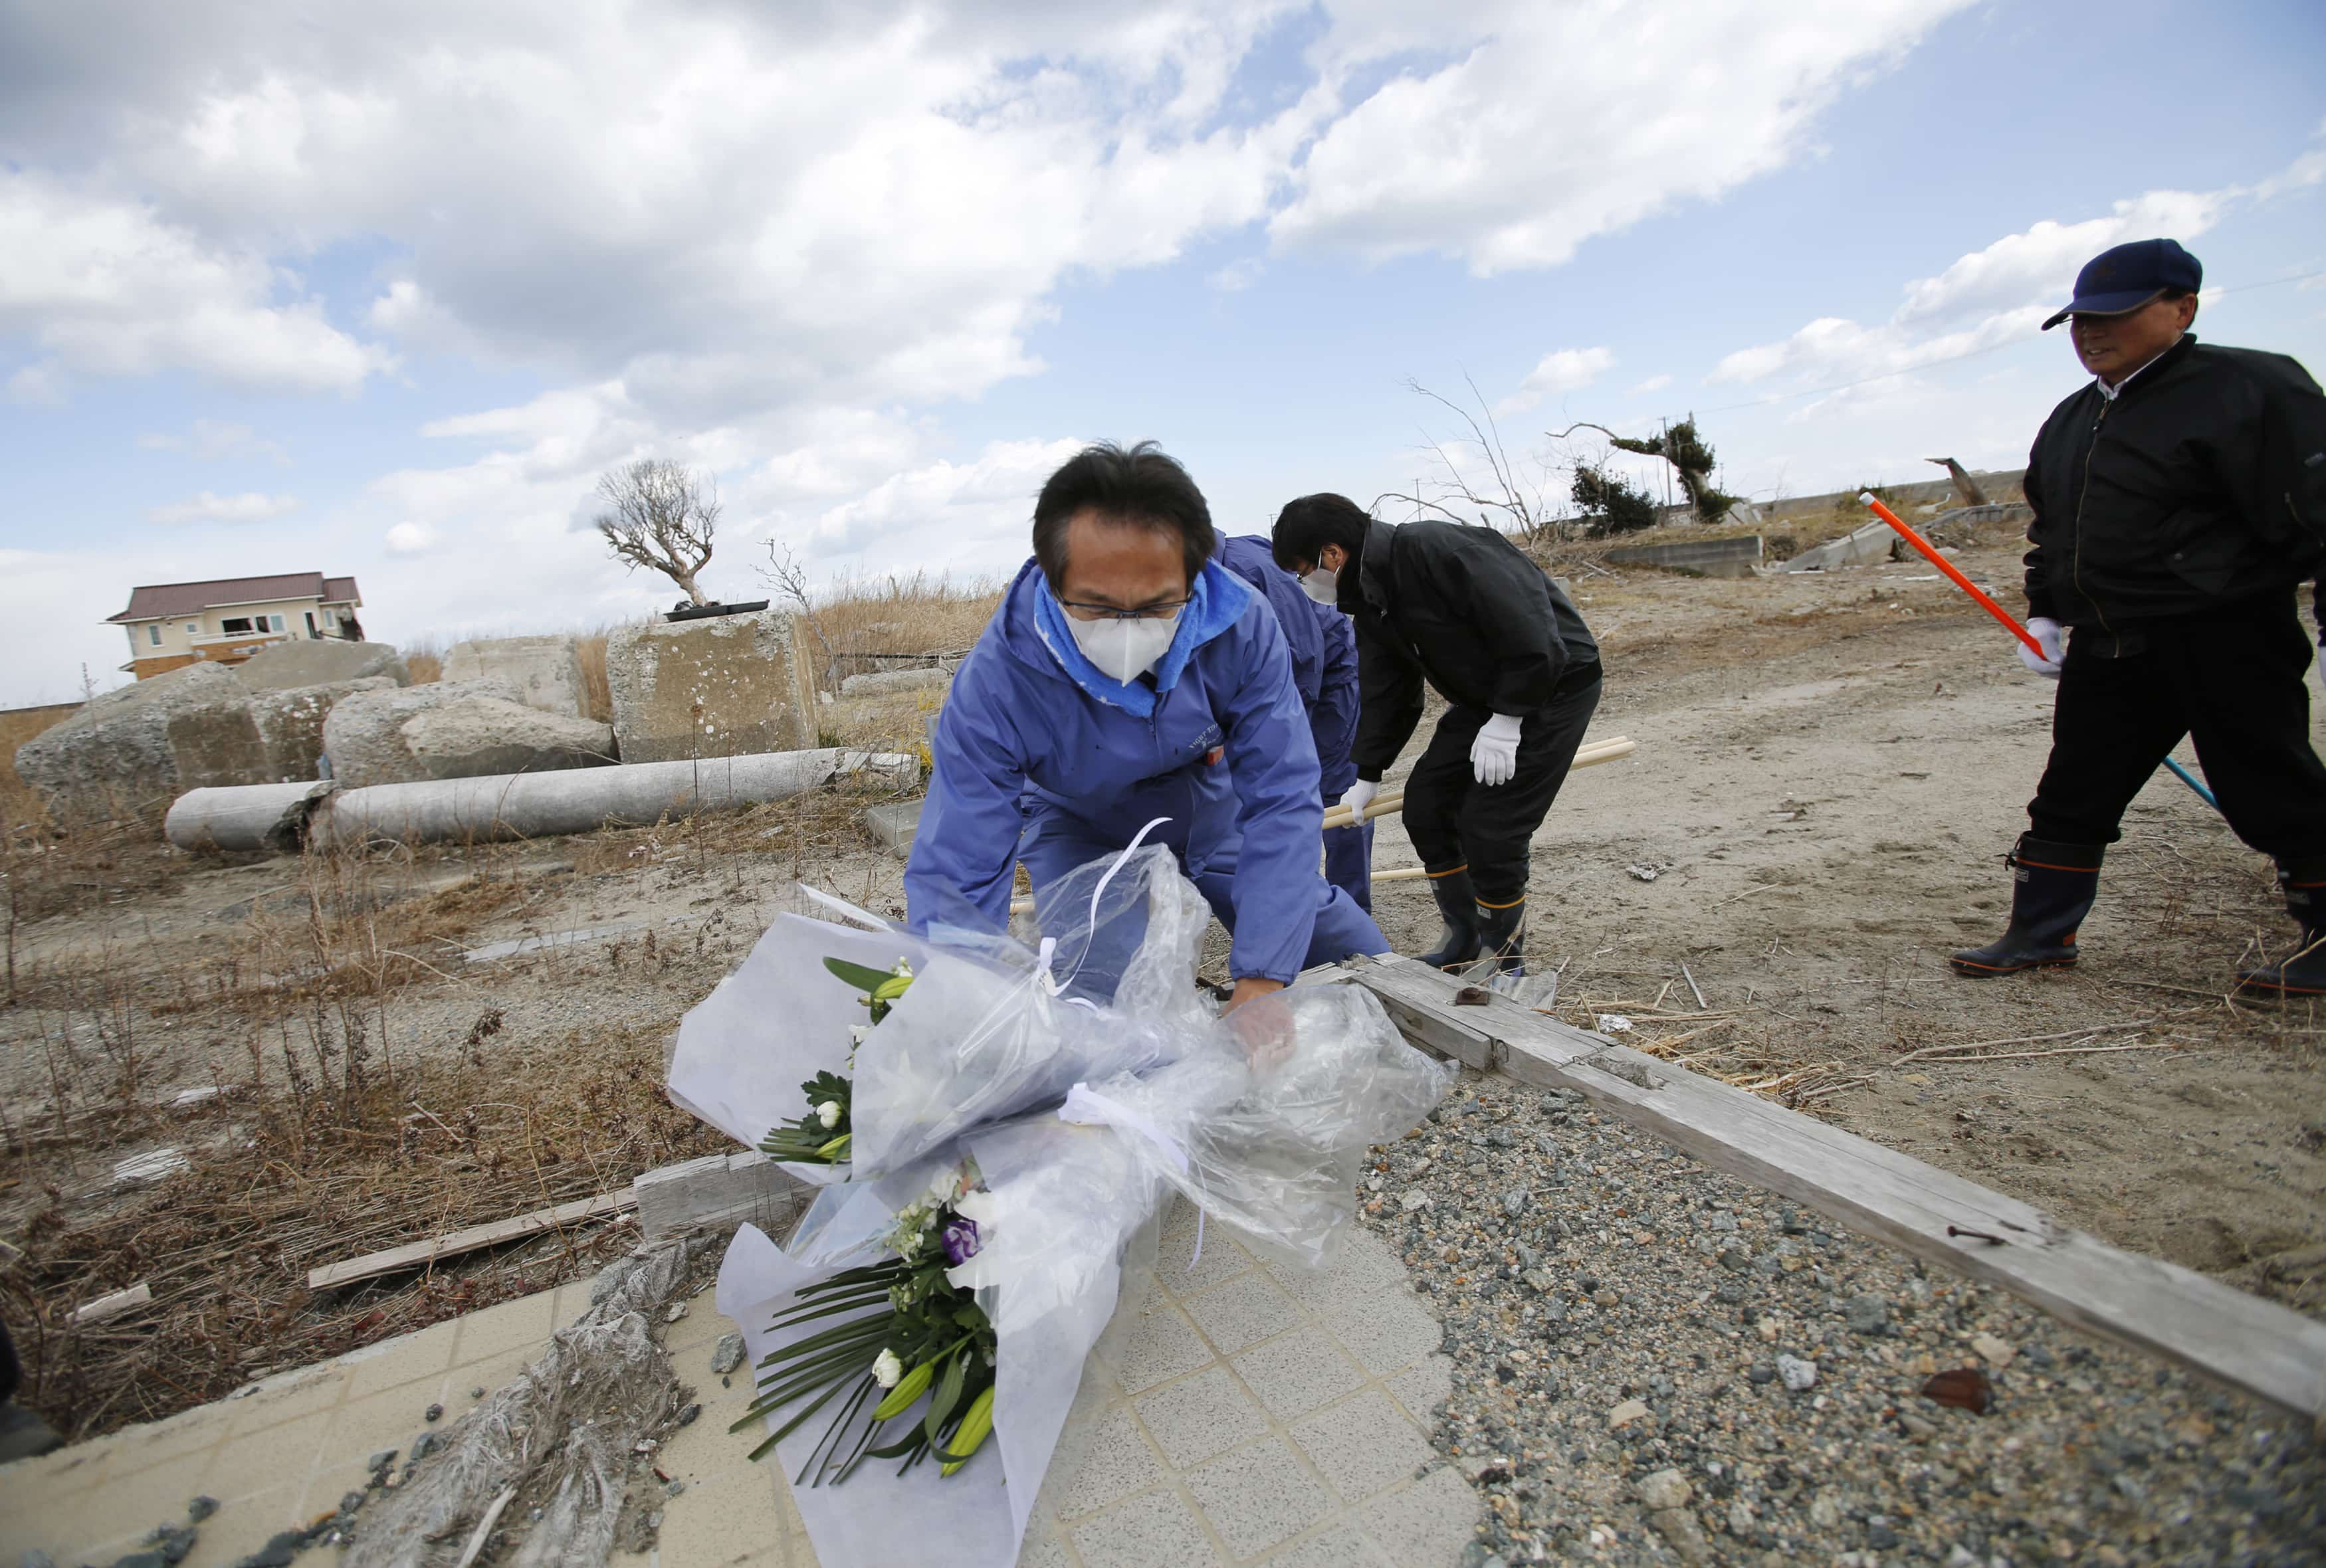 A man places flowers as he prays for victims of the 2011 earthquake and tsunami in Namie town, Fukushima prefecture, 11 March 2014, REUTERS/Toru Hanai